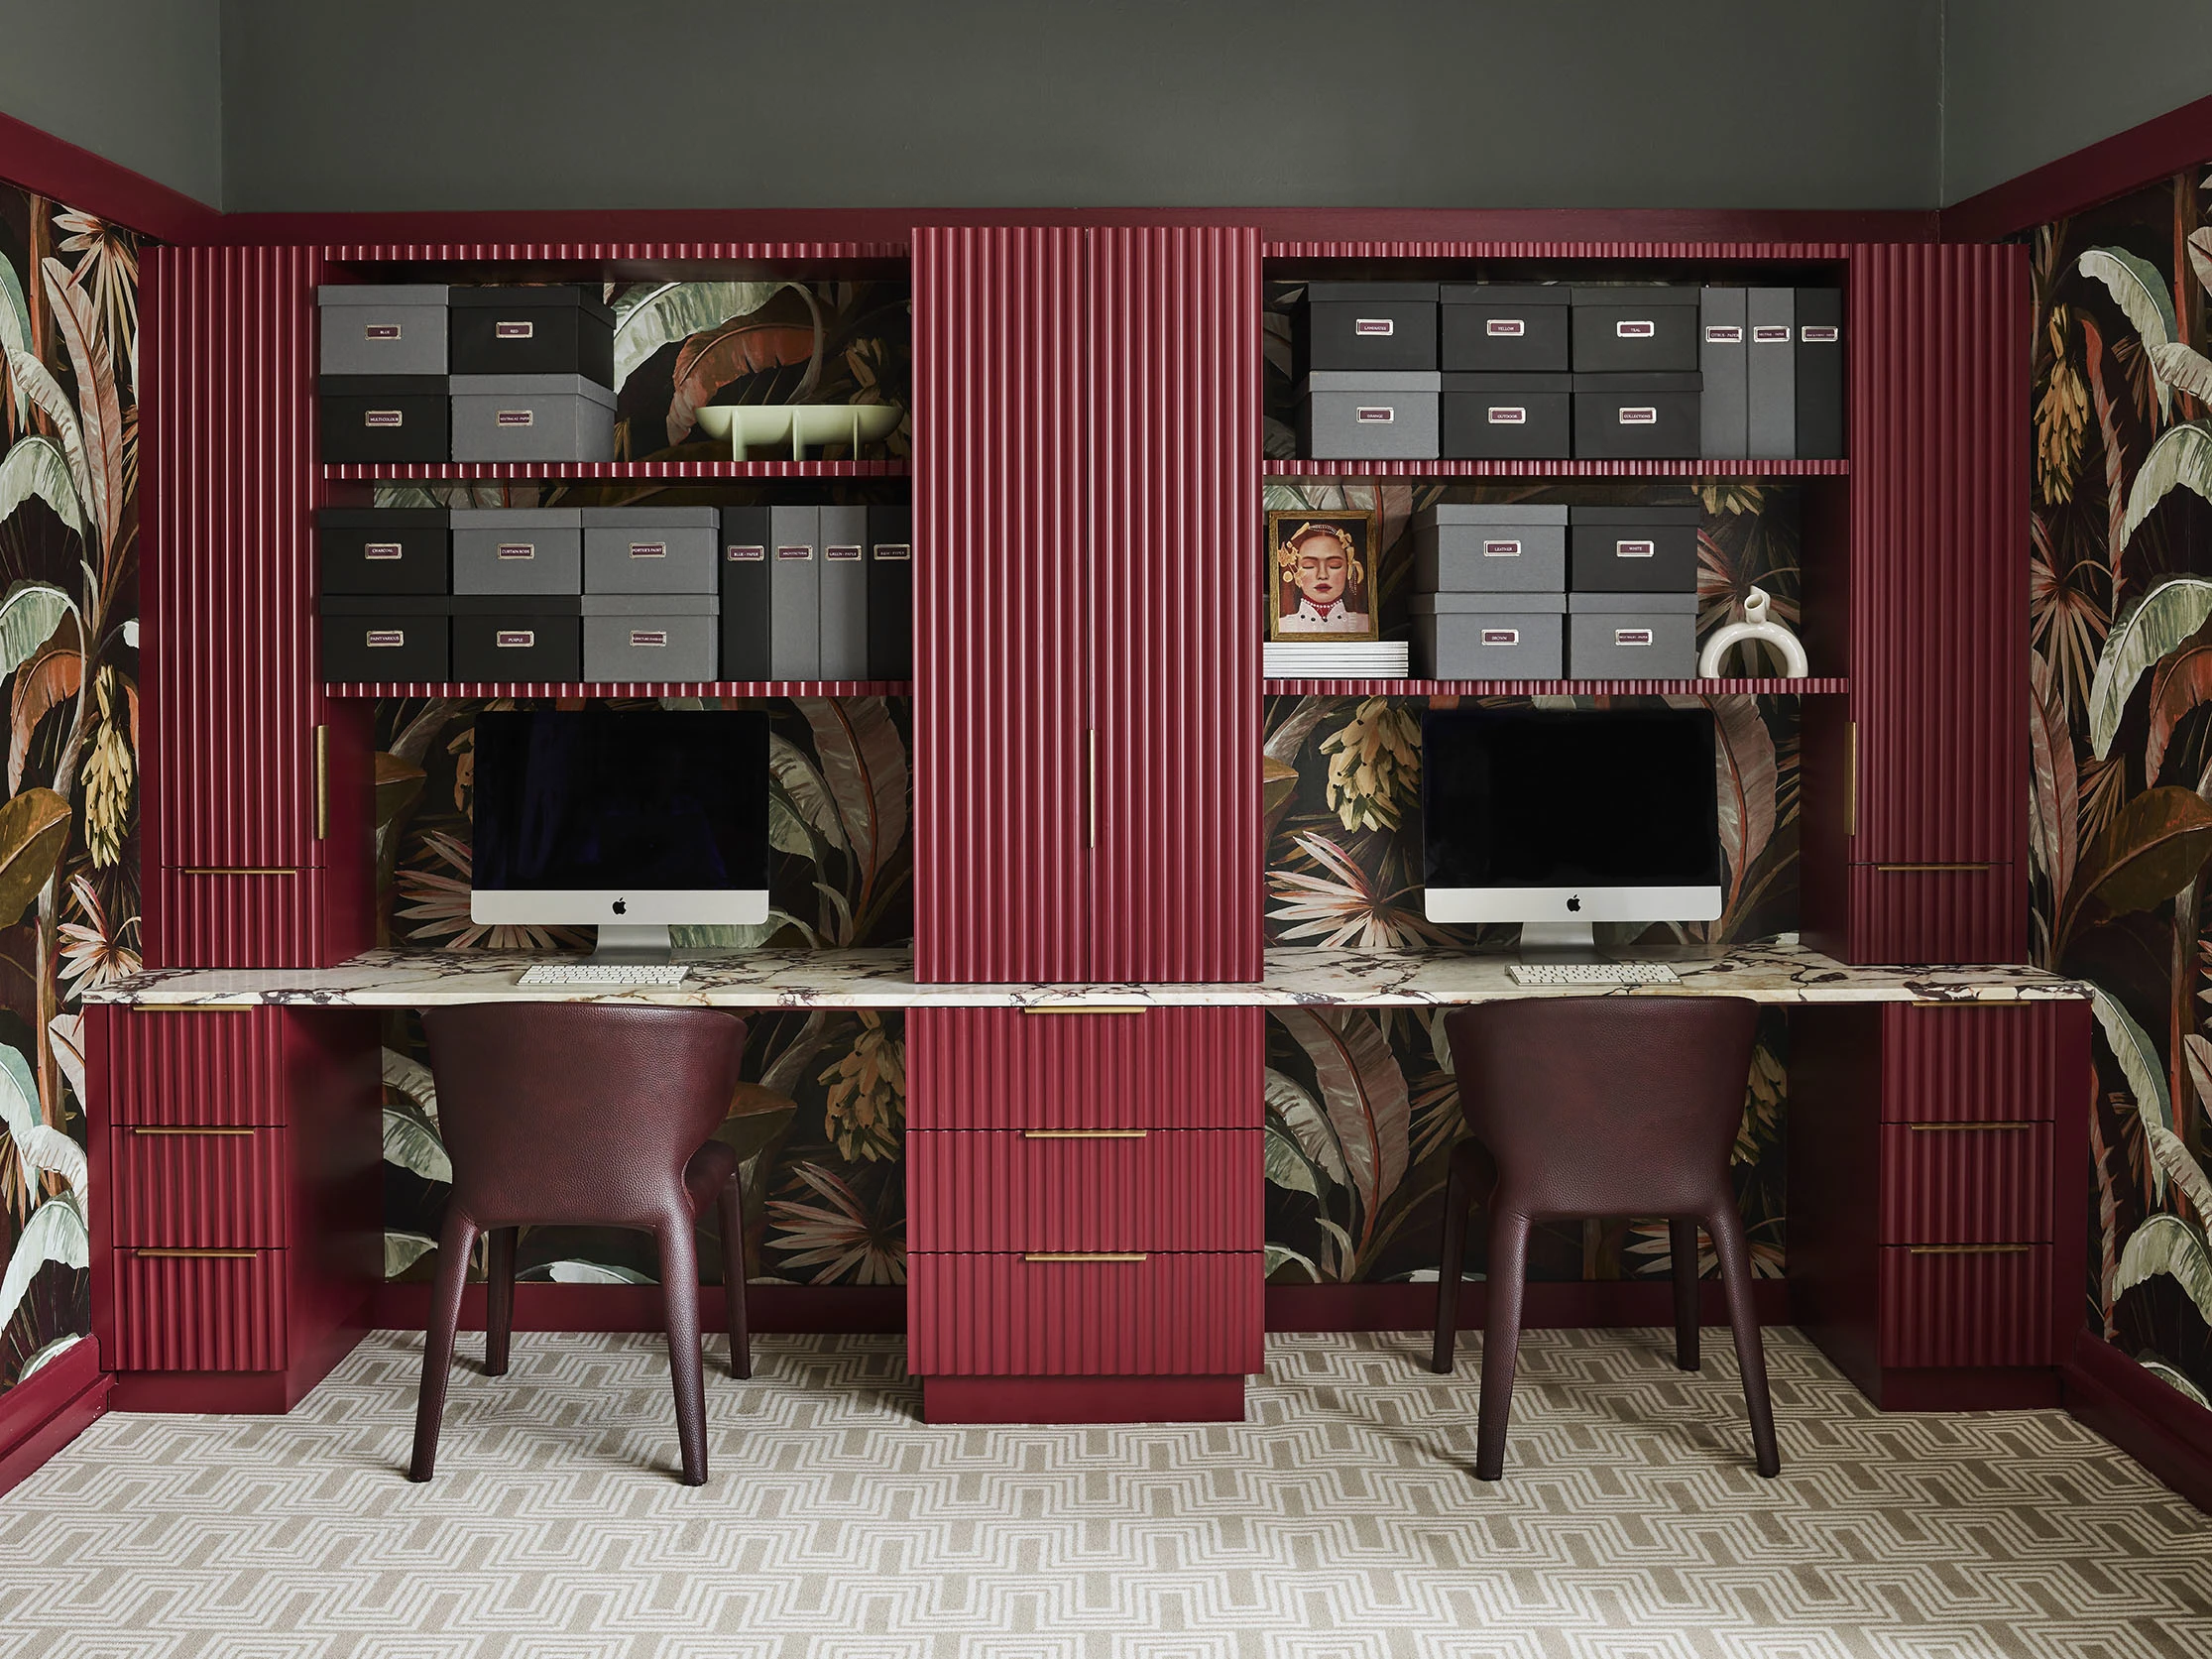 Study with wallpaper, maroon cabinets and drawers, computers, shelving with storage boxes.